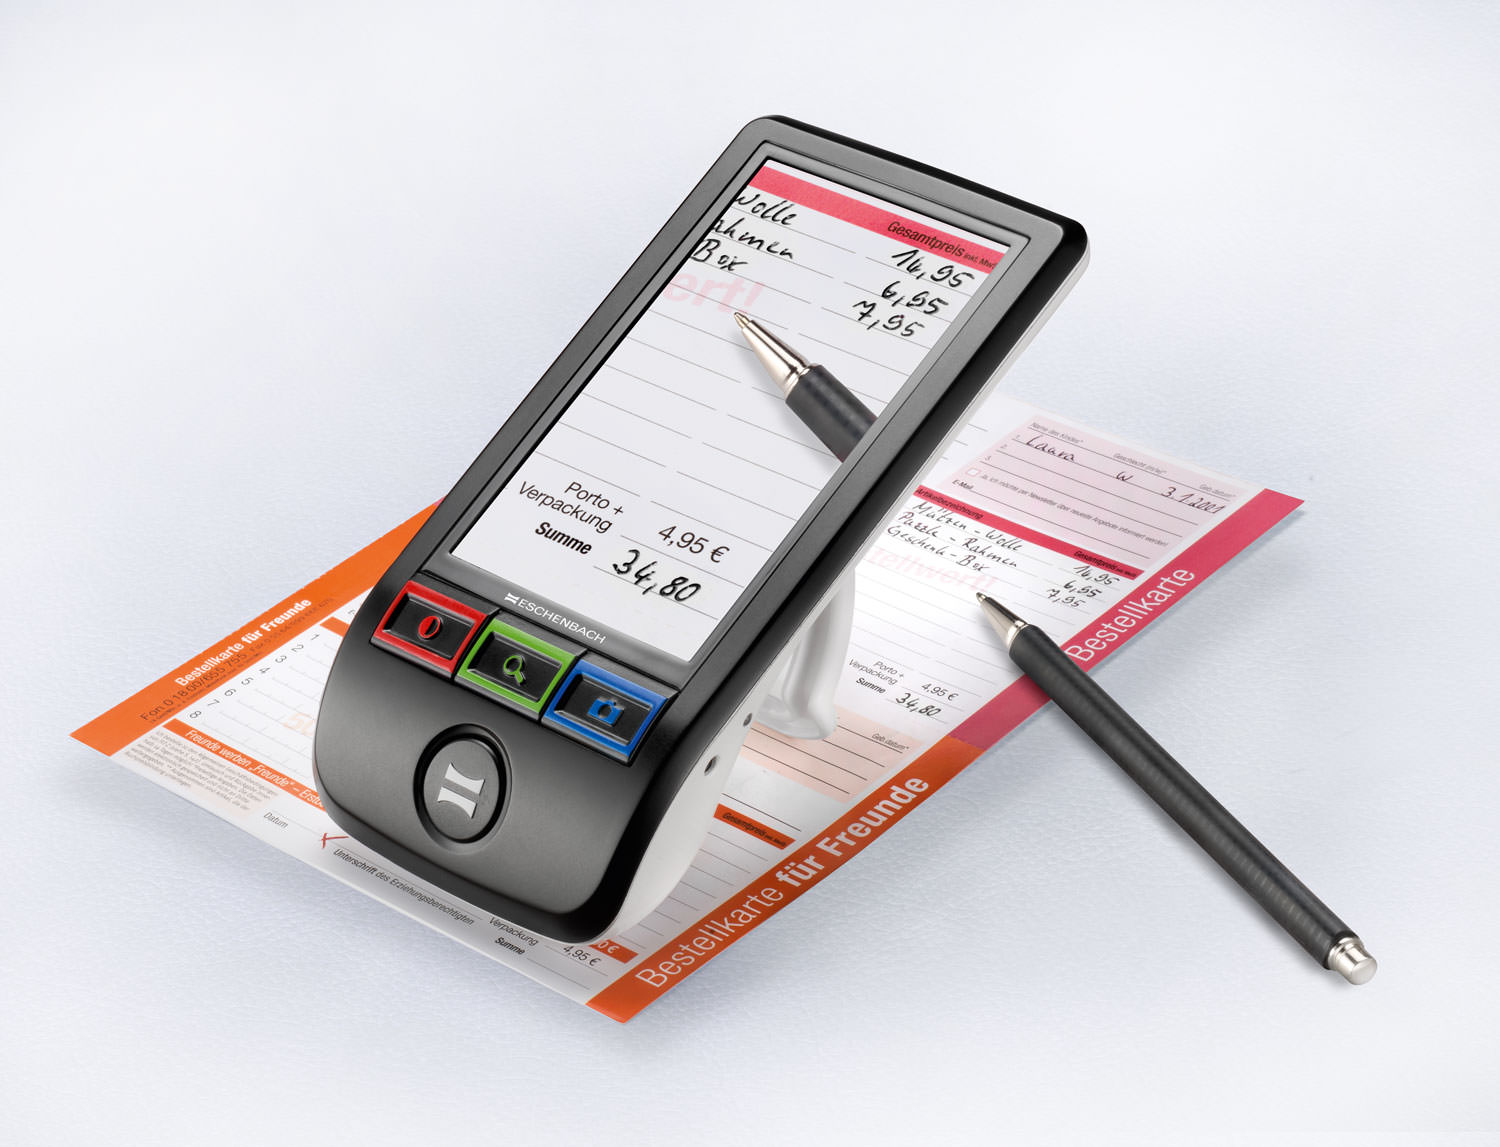 SmartLux Digital on its stand magnifying a receipt.